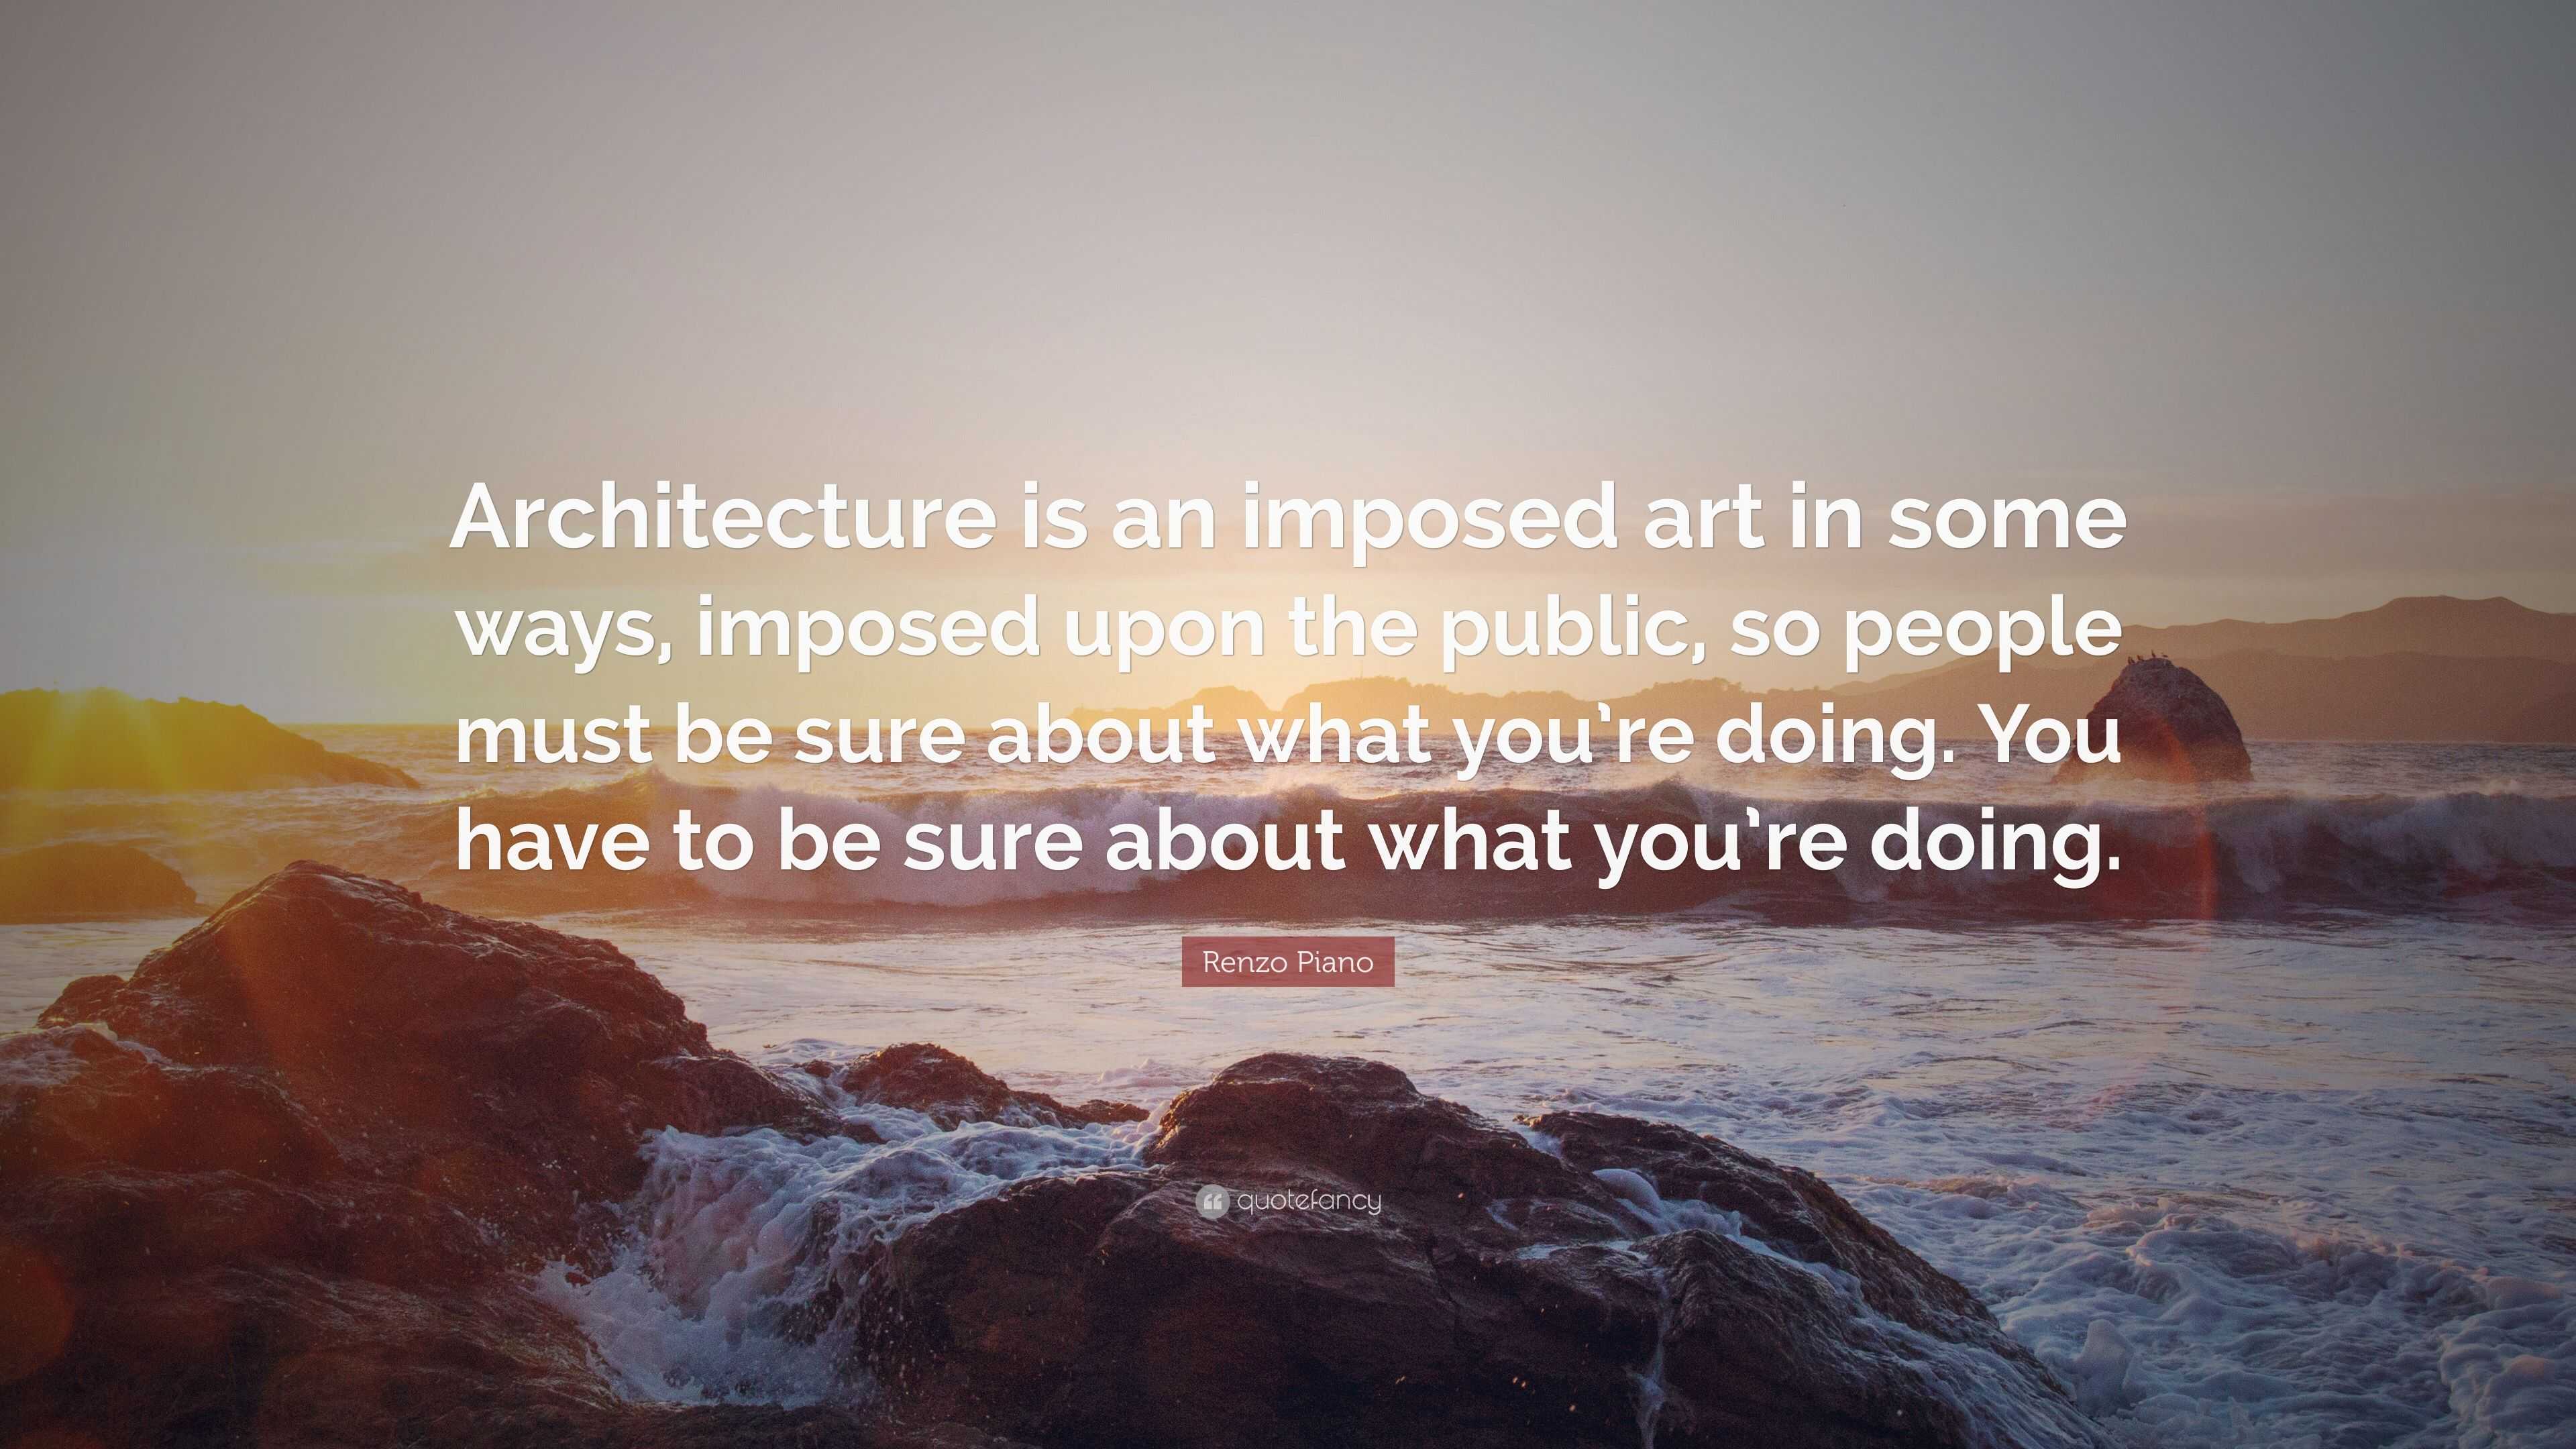 Renzo Piano Quote: “Architecture is an imposed art in some ways ...